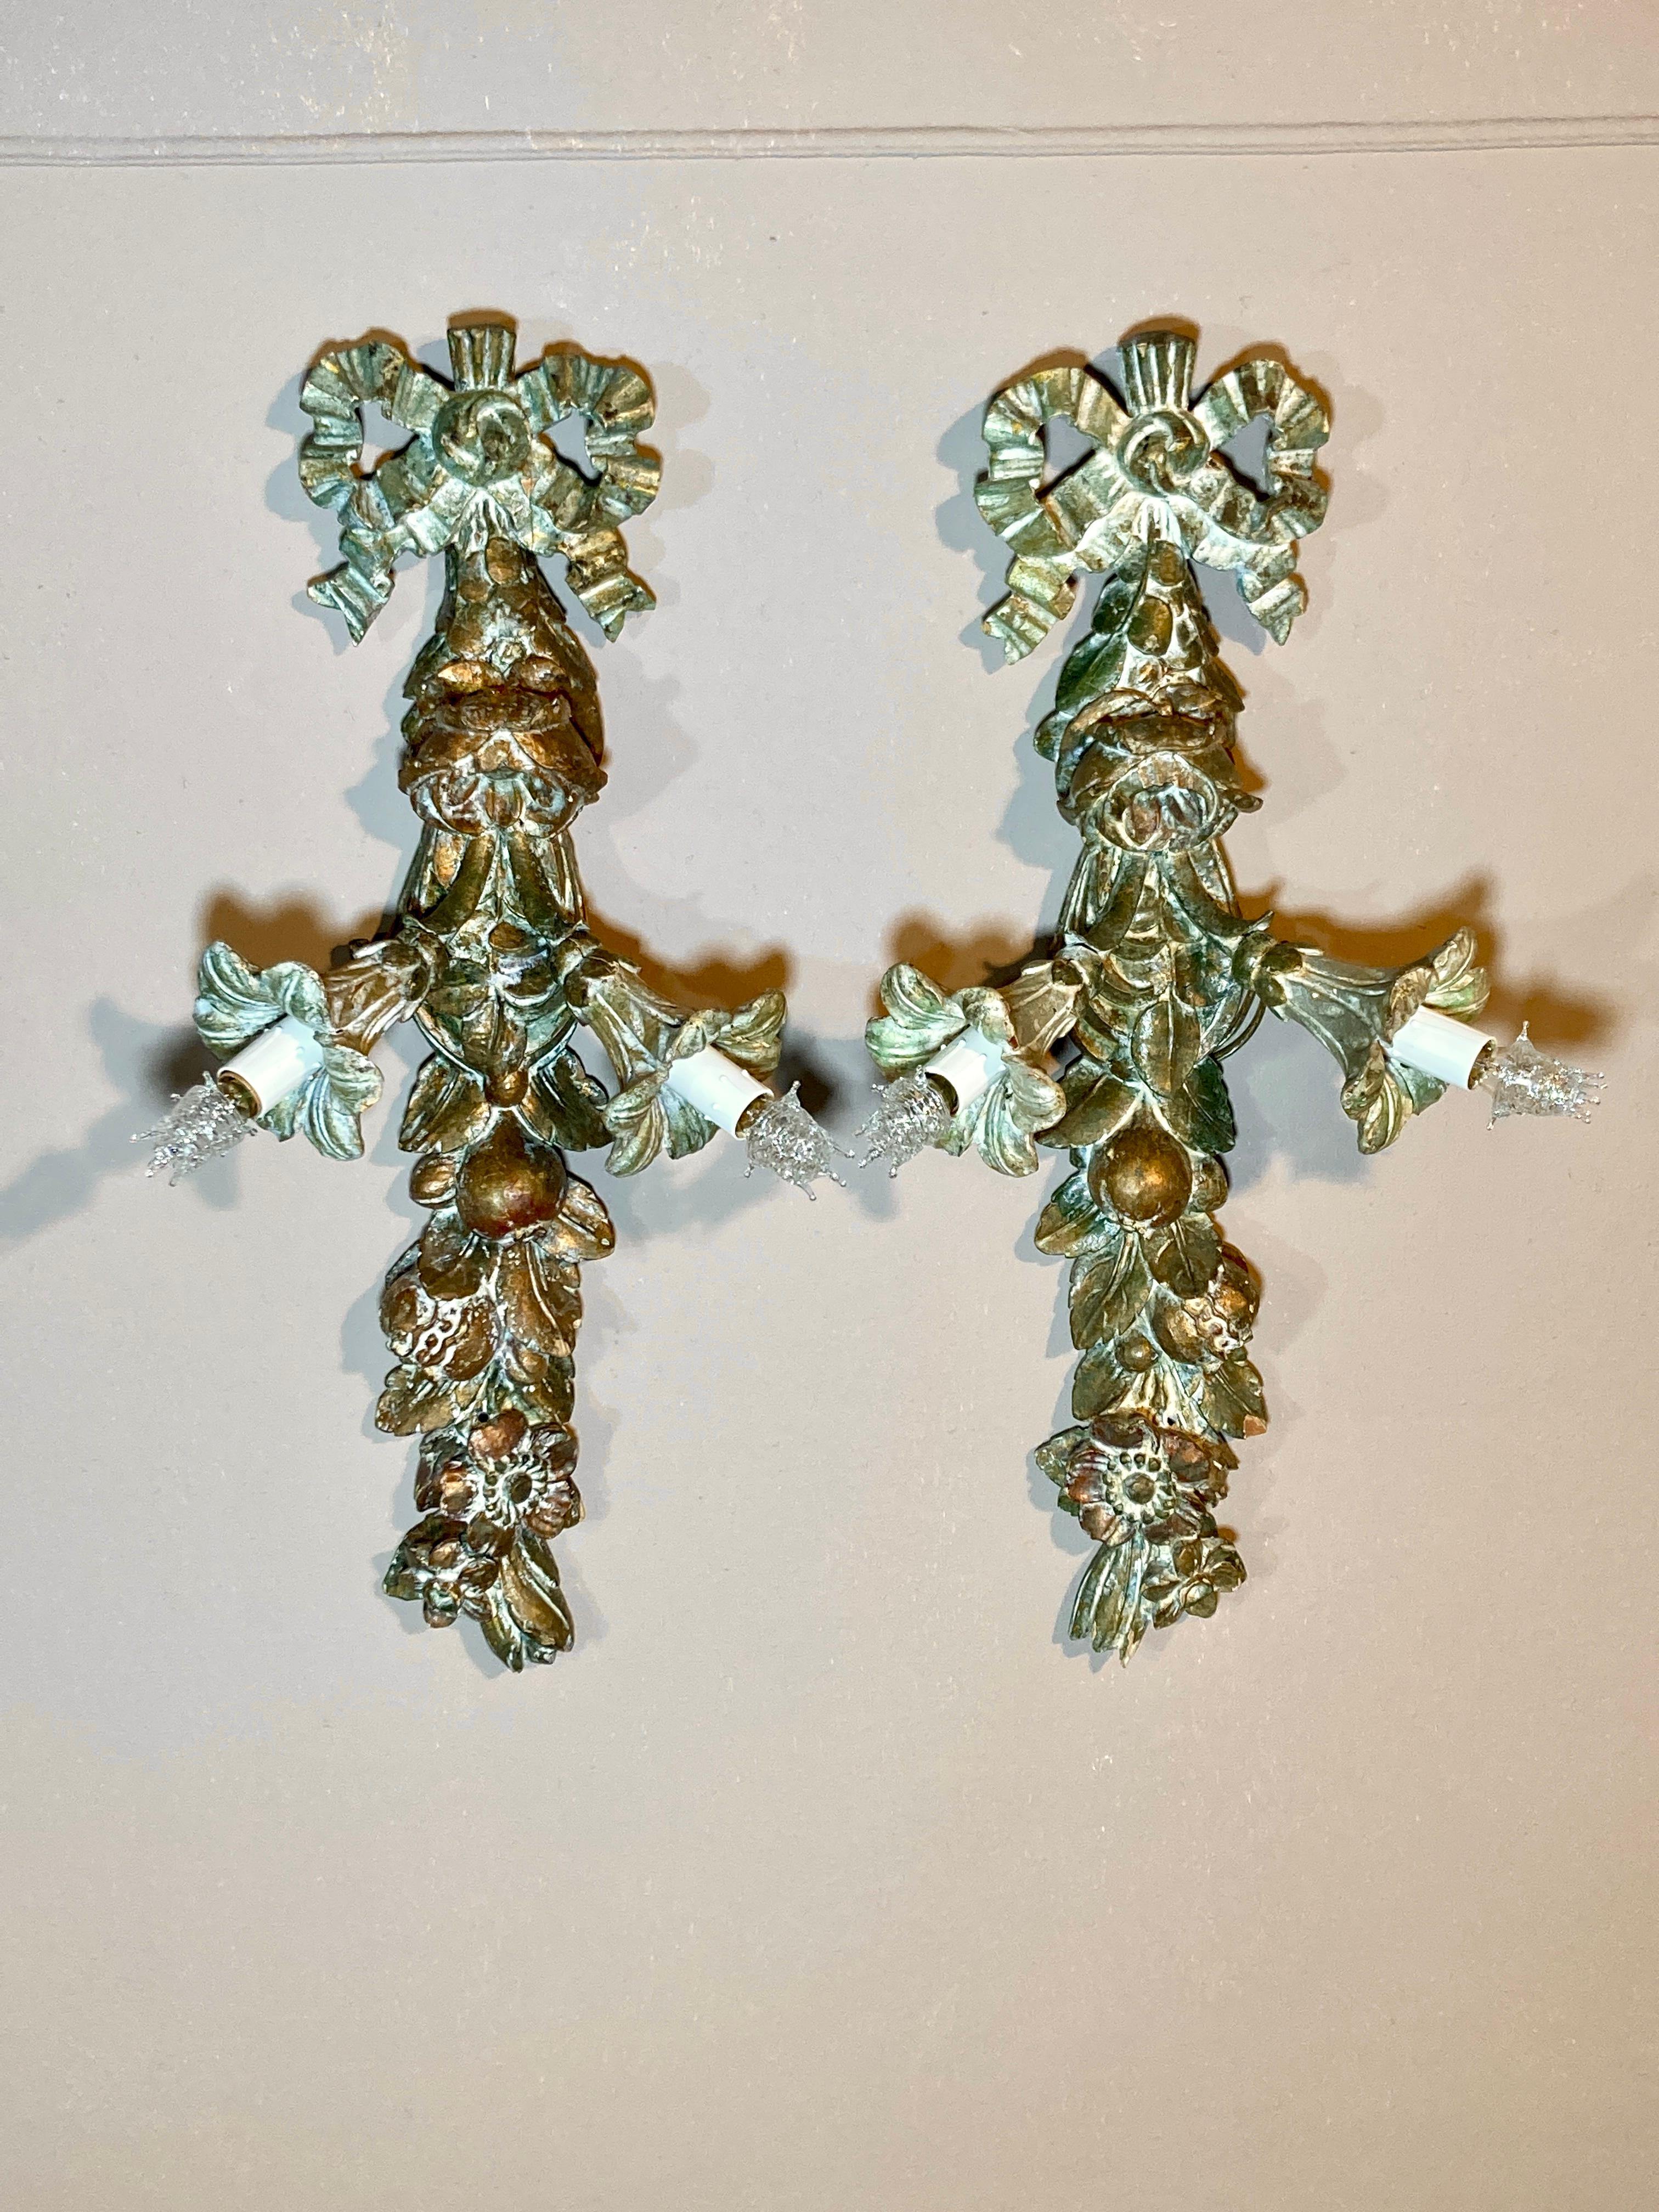 Found in the collection of a well-traveled architect in Connecticut, these fine hand carved Italian wall sconces are top quality. The unusual form, with the downward pointing lights, is complemented by the original surface, consisting of a